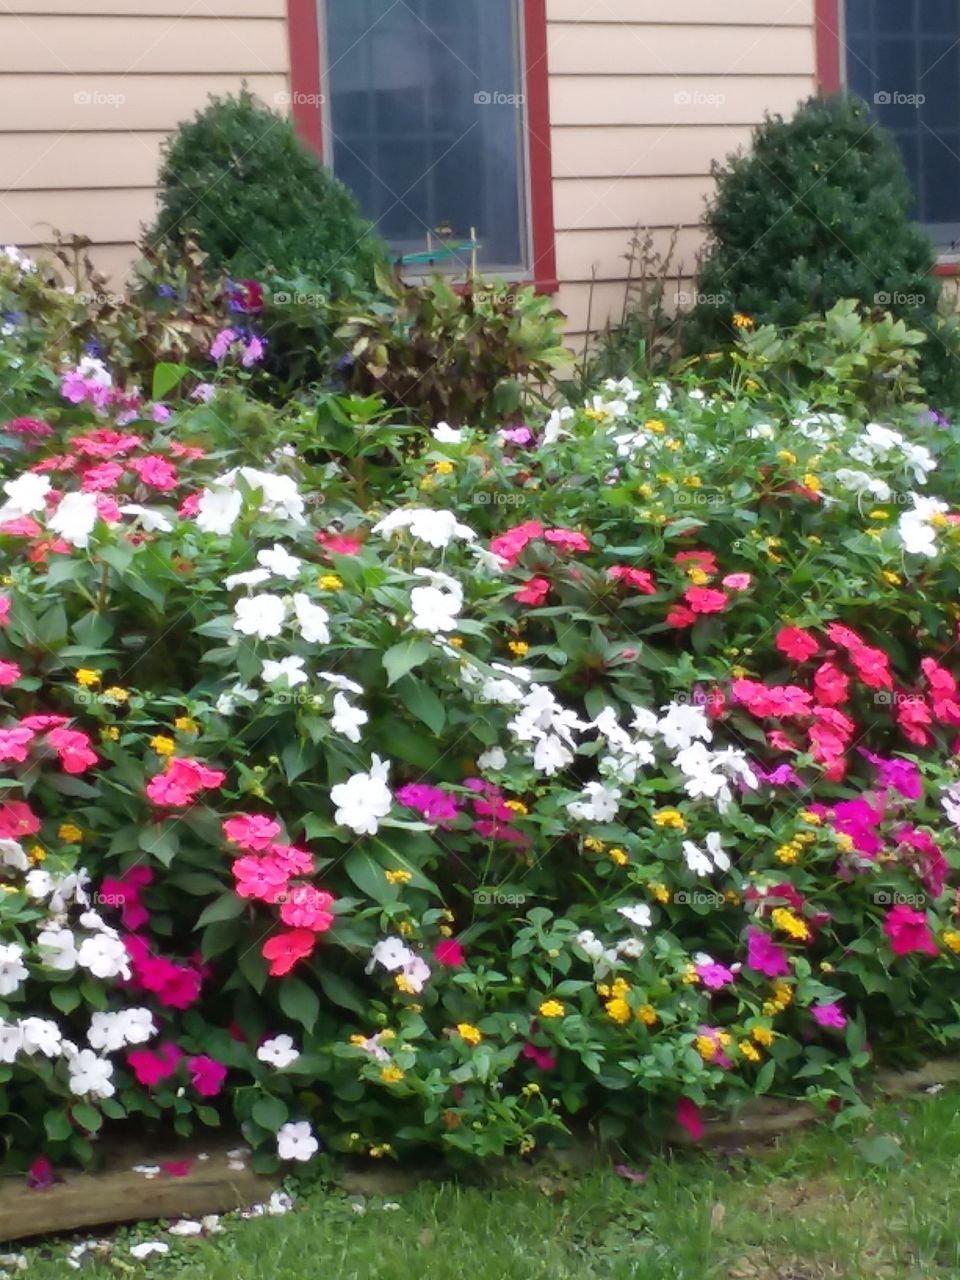 A beautiful garden of colorful flowers in the yard of a friend.